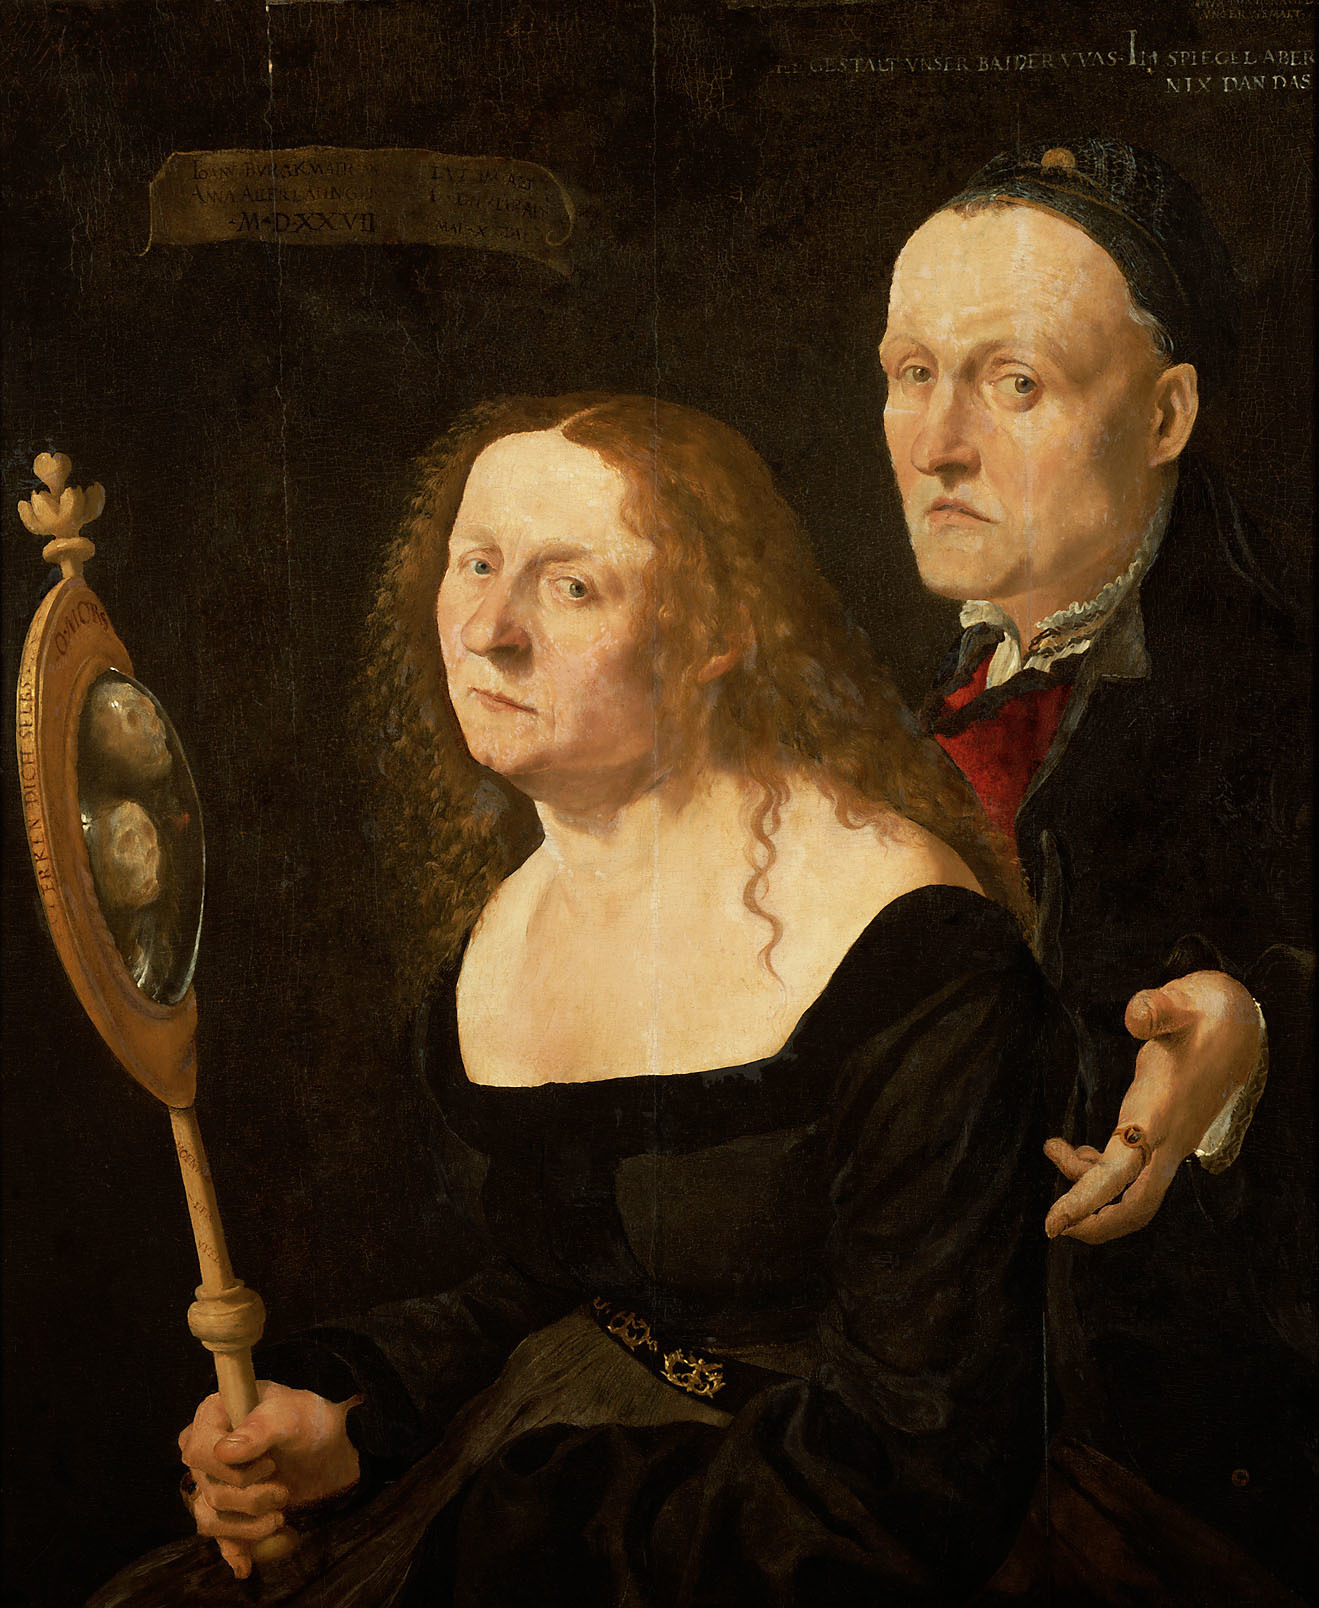 The painter Hans Burgkmair and his wife Anna (painting by [[Lukas Furtenagel]], 1529)